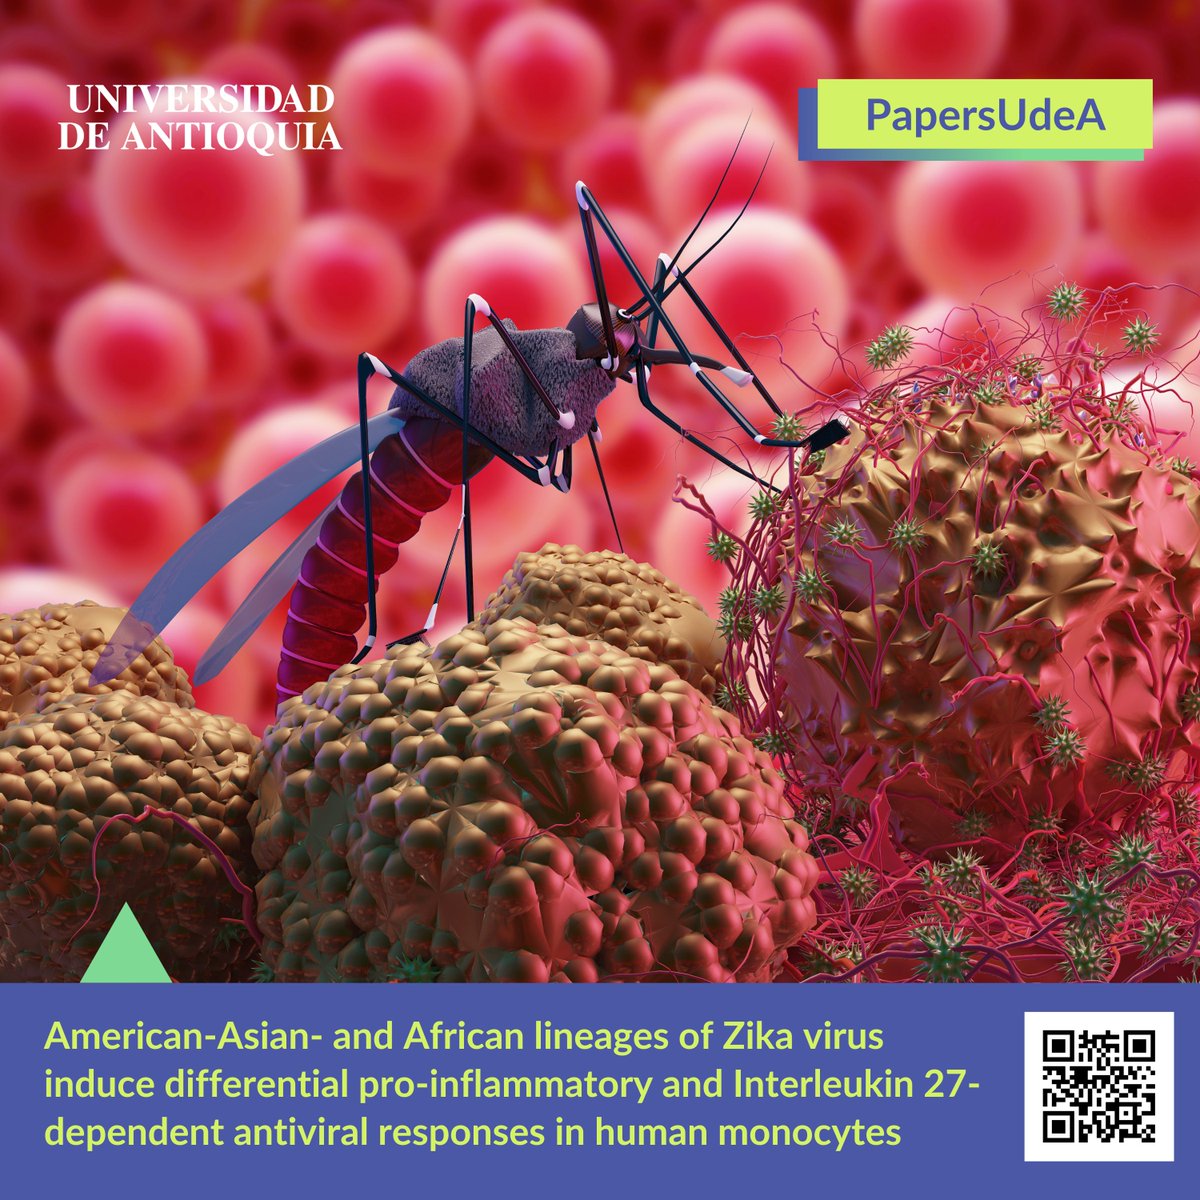 #PapersUdeA - 🦟 ZIKV Puerto Rico induced greater proinflammatory response and IL27-dependent antiviral activity than ZIKV Nigeria. 🔬 Monocytes were also more susceptible to infection with ZIKV from Colombia than with ZIKV from Dakar. 👉 More at: bit.ly/3o2zE57